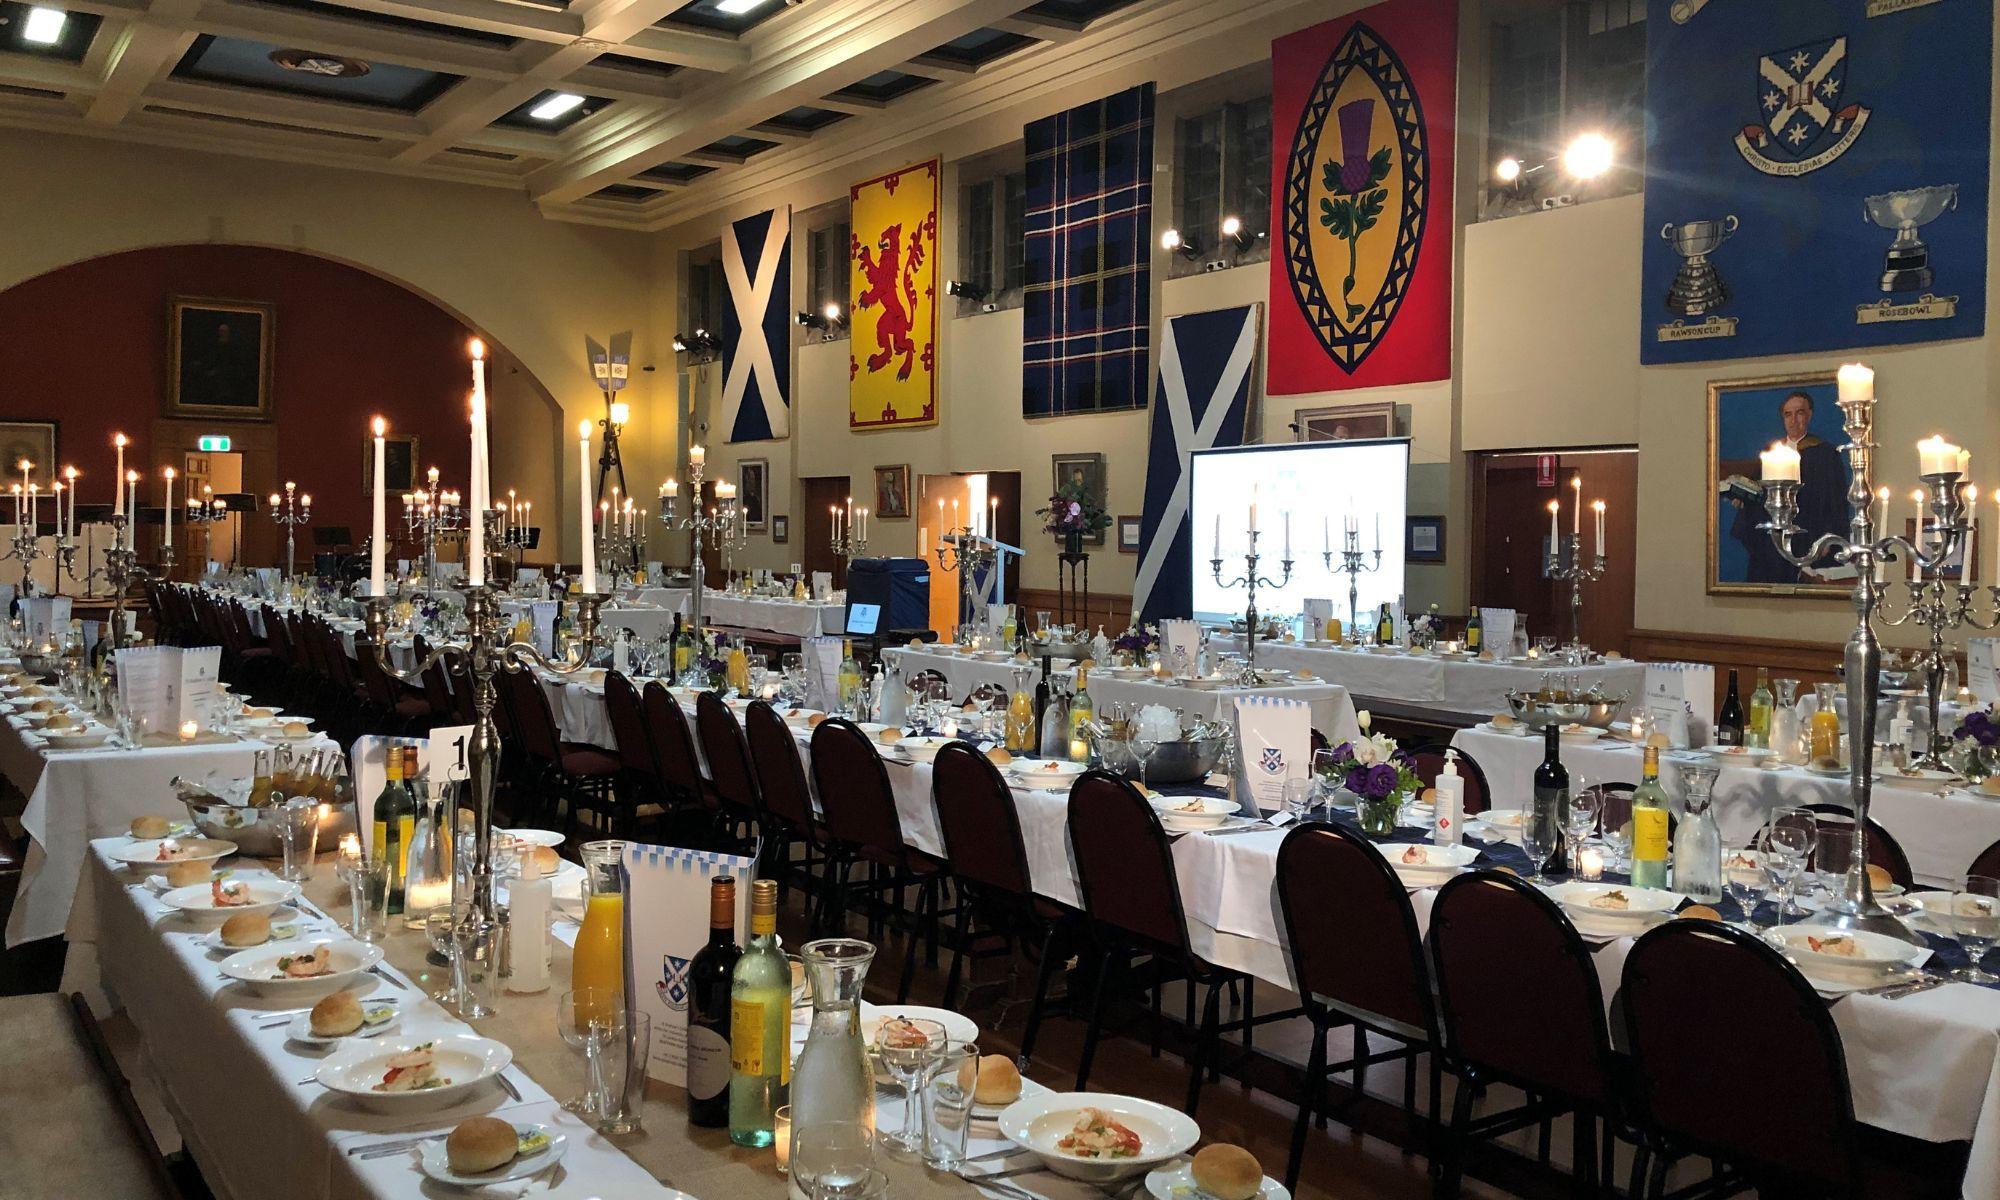 St Andrew's College Events and Conferences Dining Hall Set Up